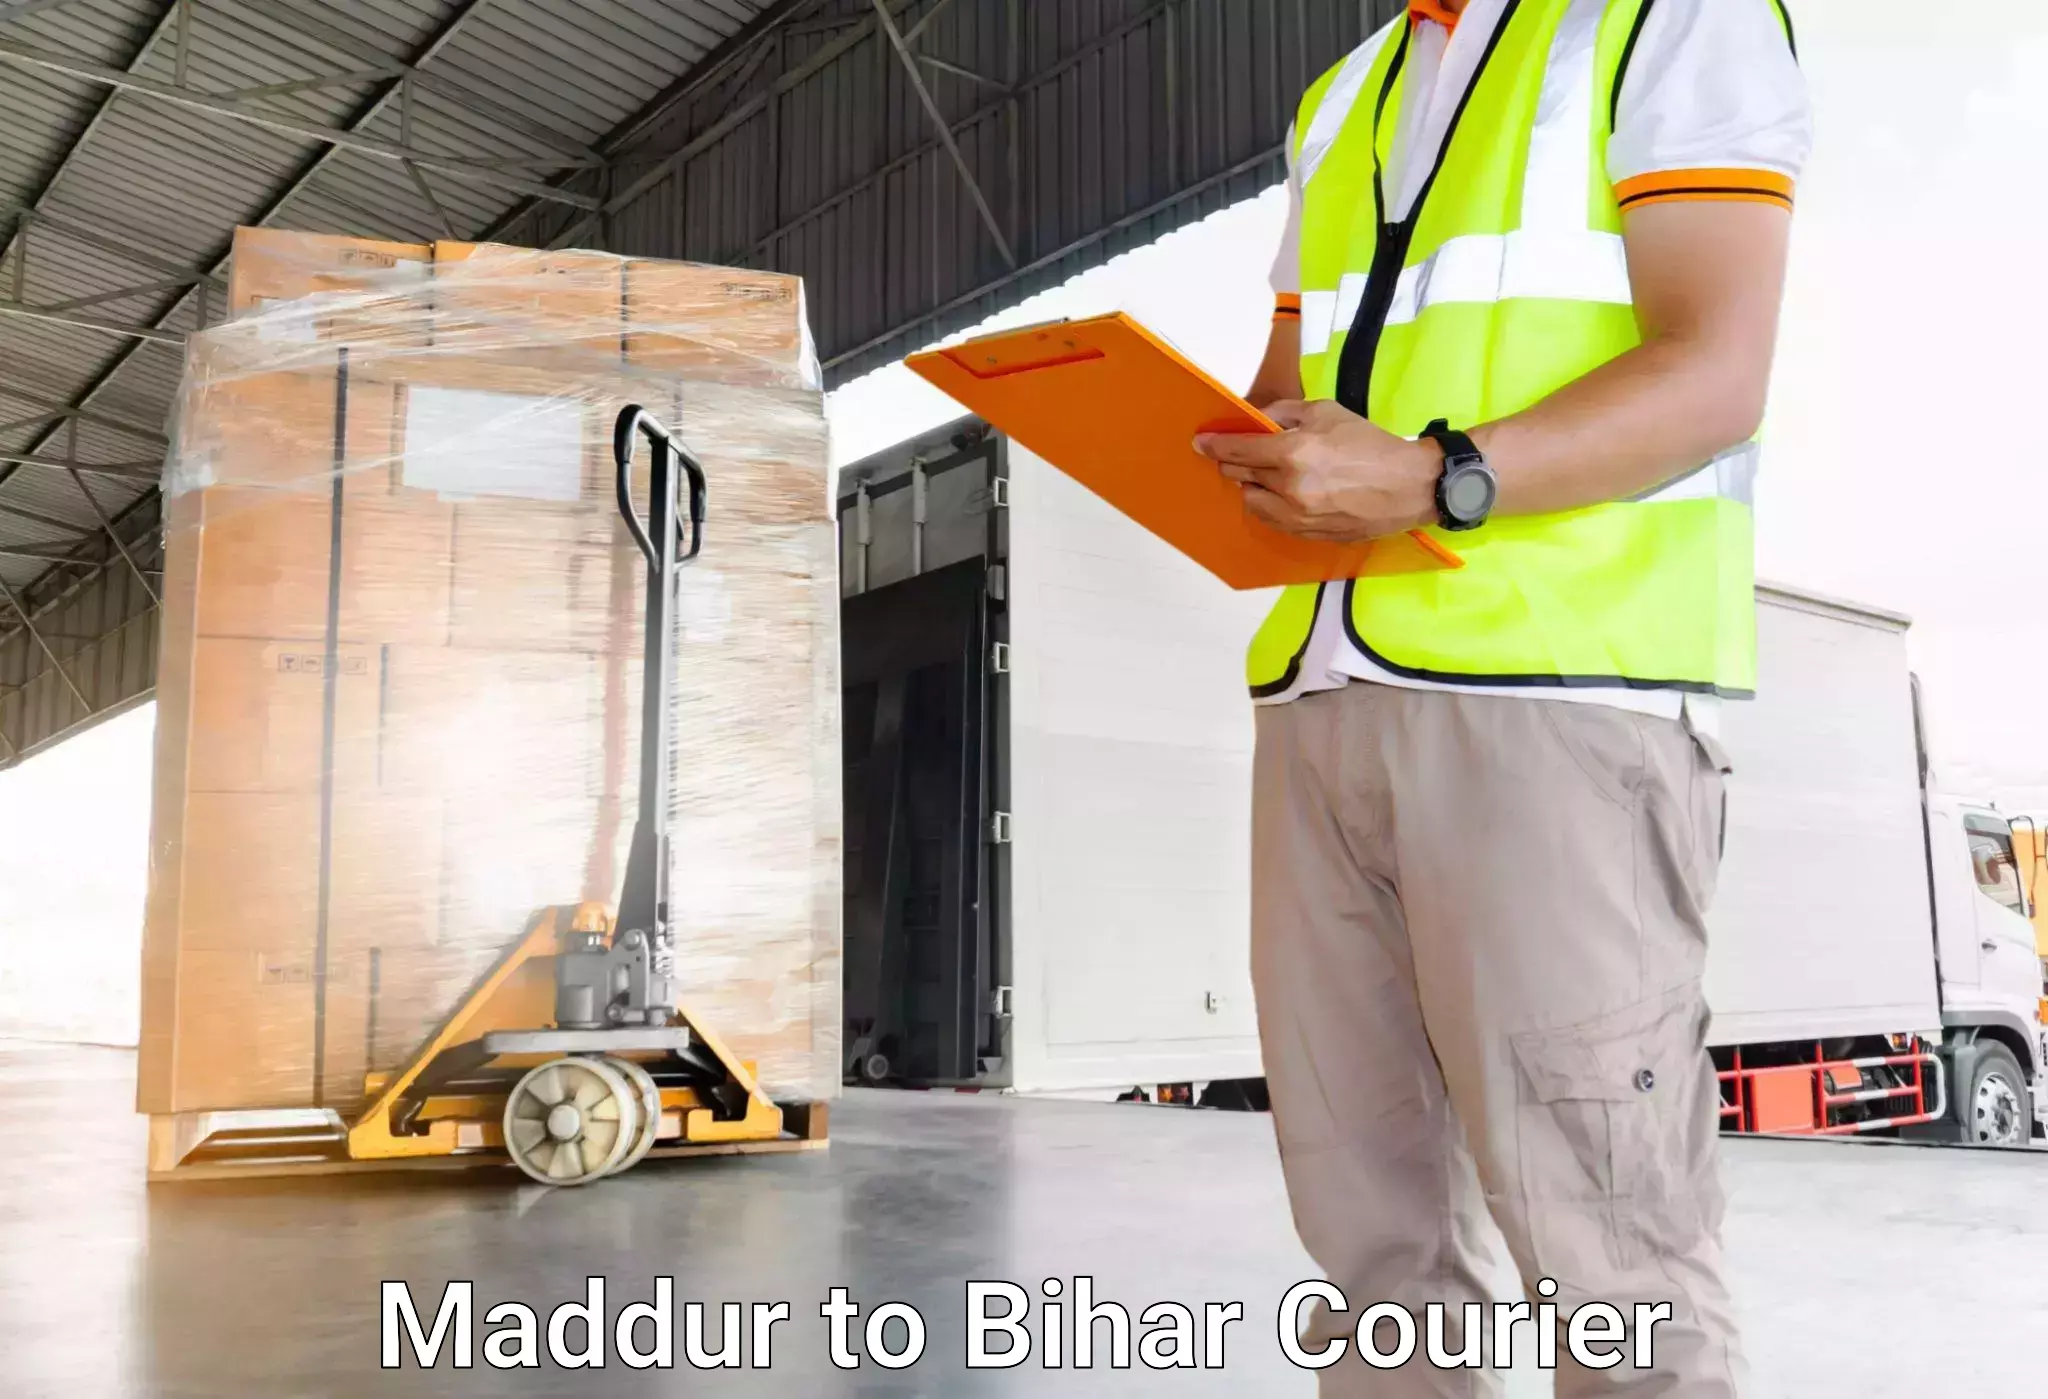 Luggage shipping specialists Maddur to Bihar